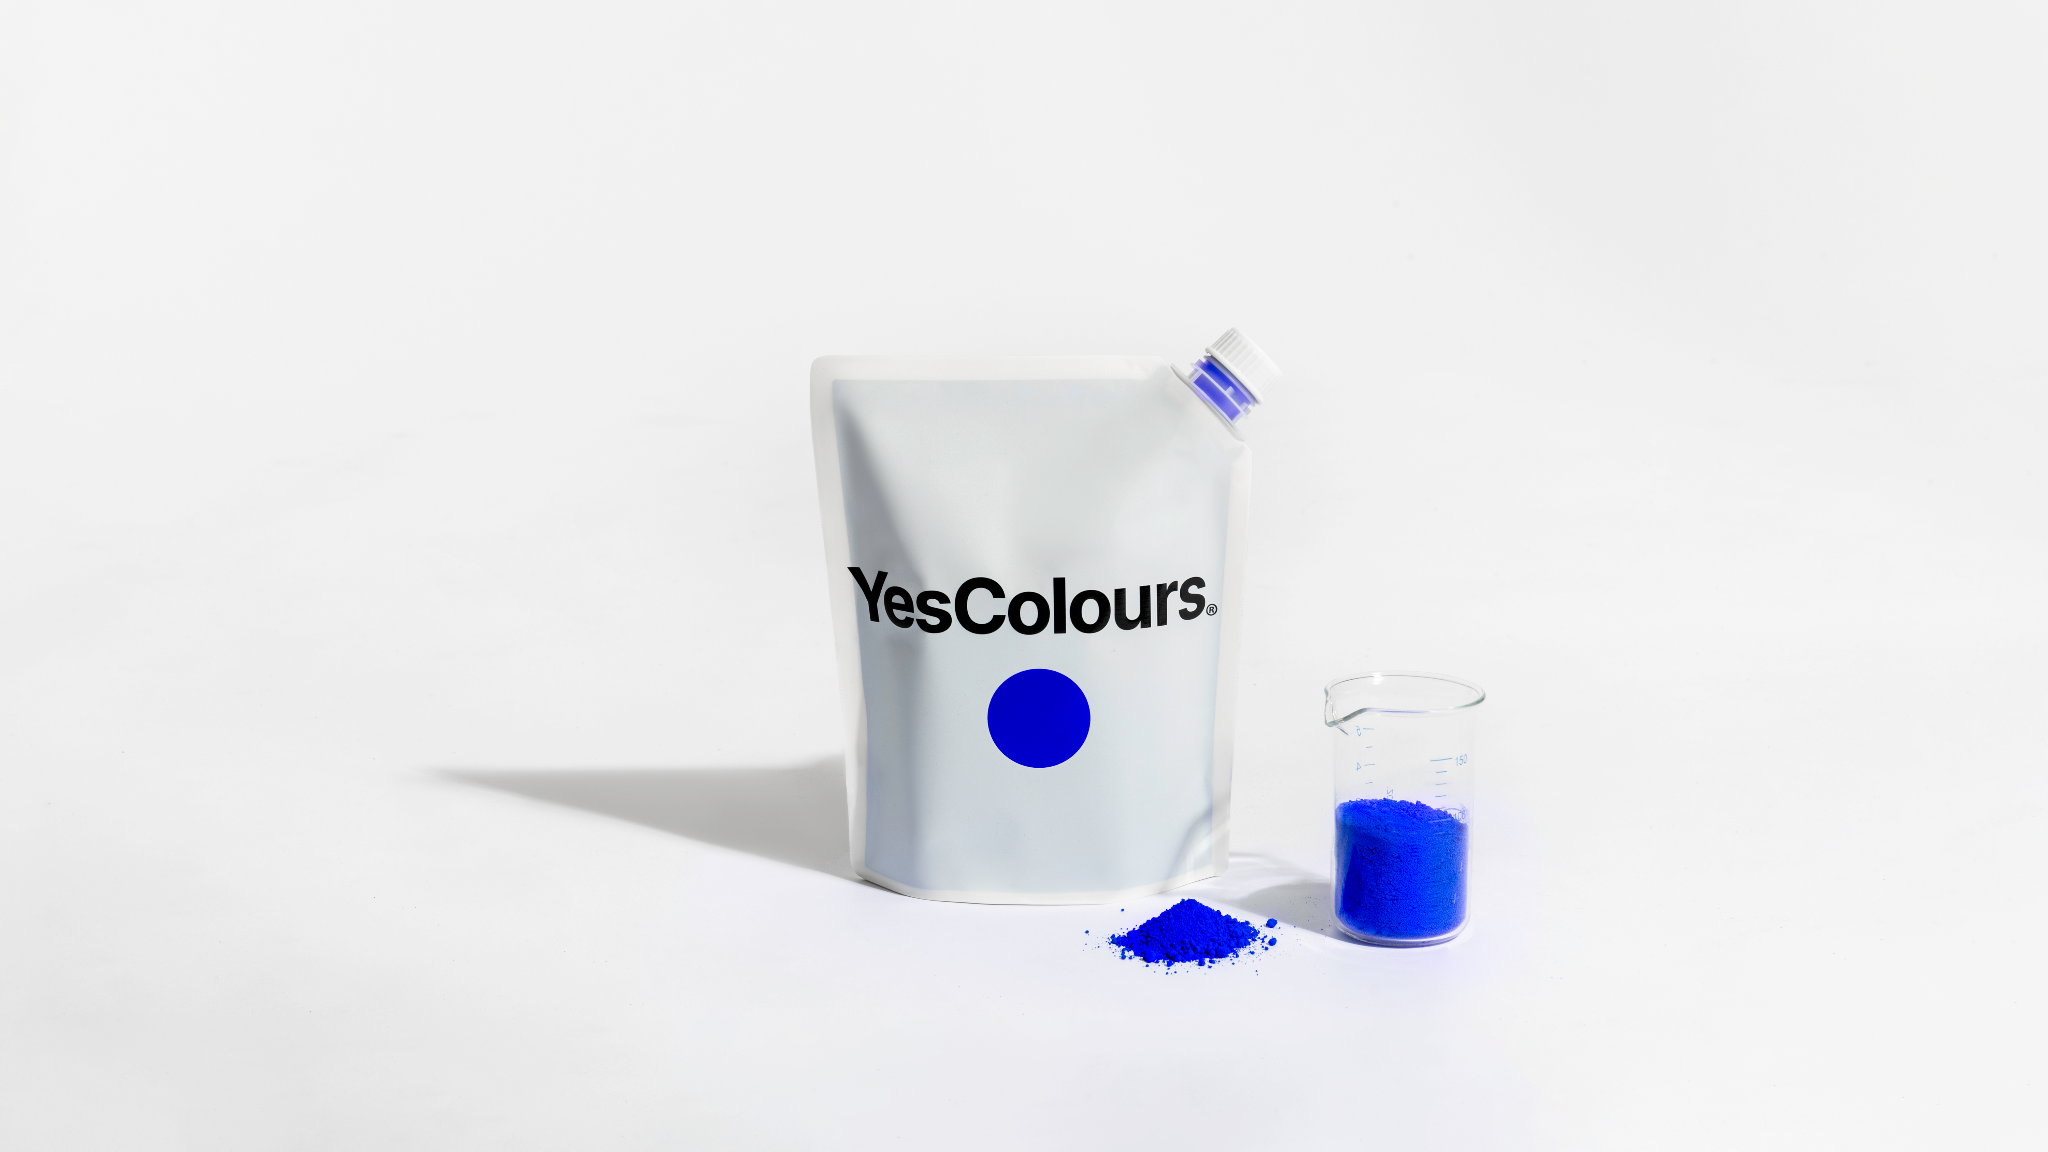 Decorating gets eco: Introducing YesColours, creators of Europe's first recyclable paint pouch